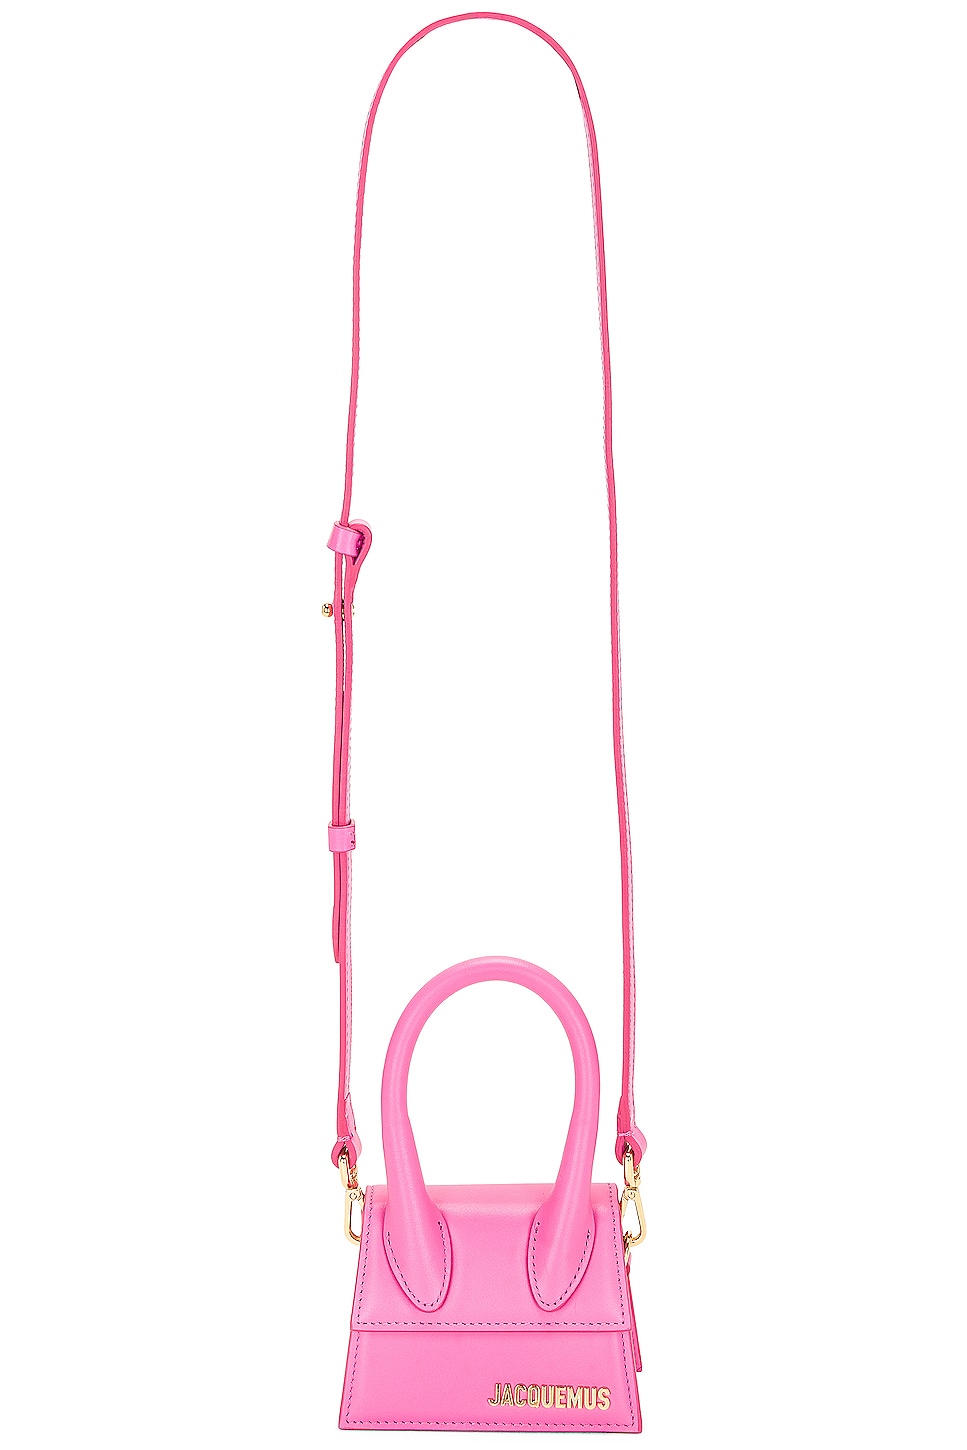 Le Chiquito Bag in Pink